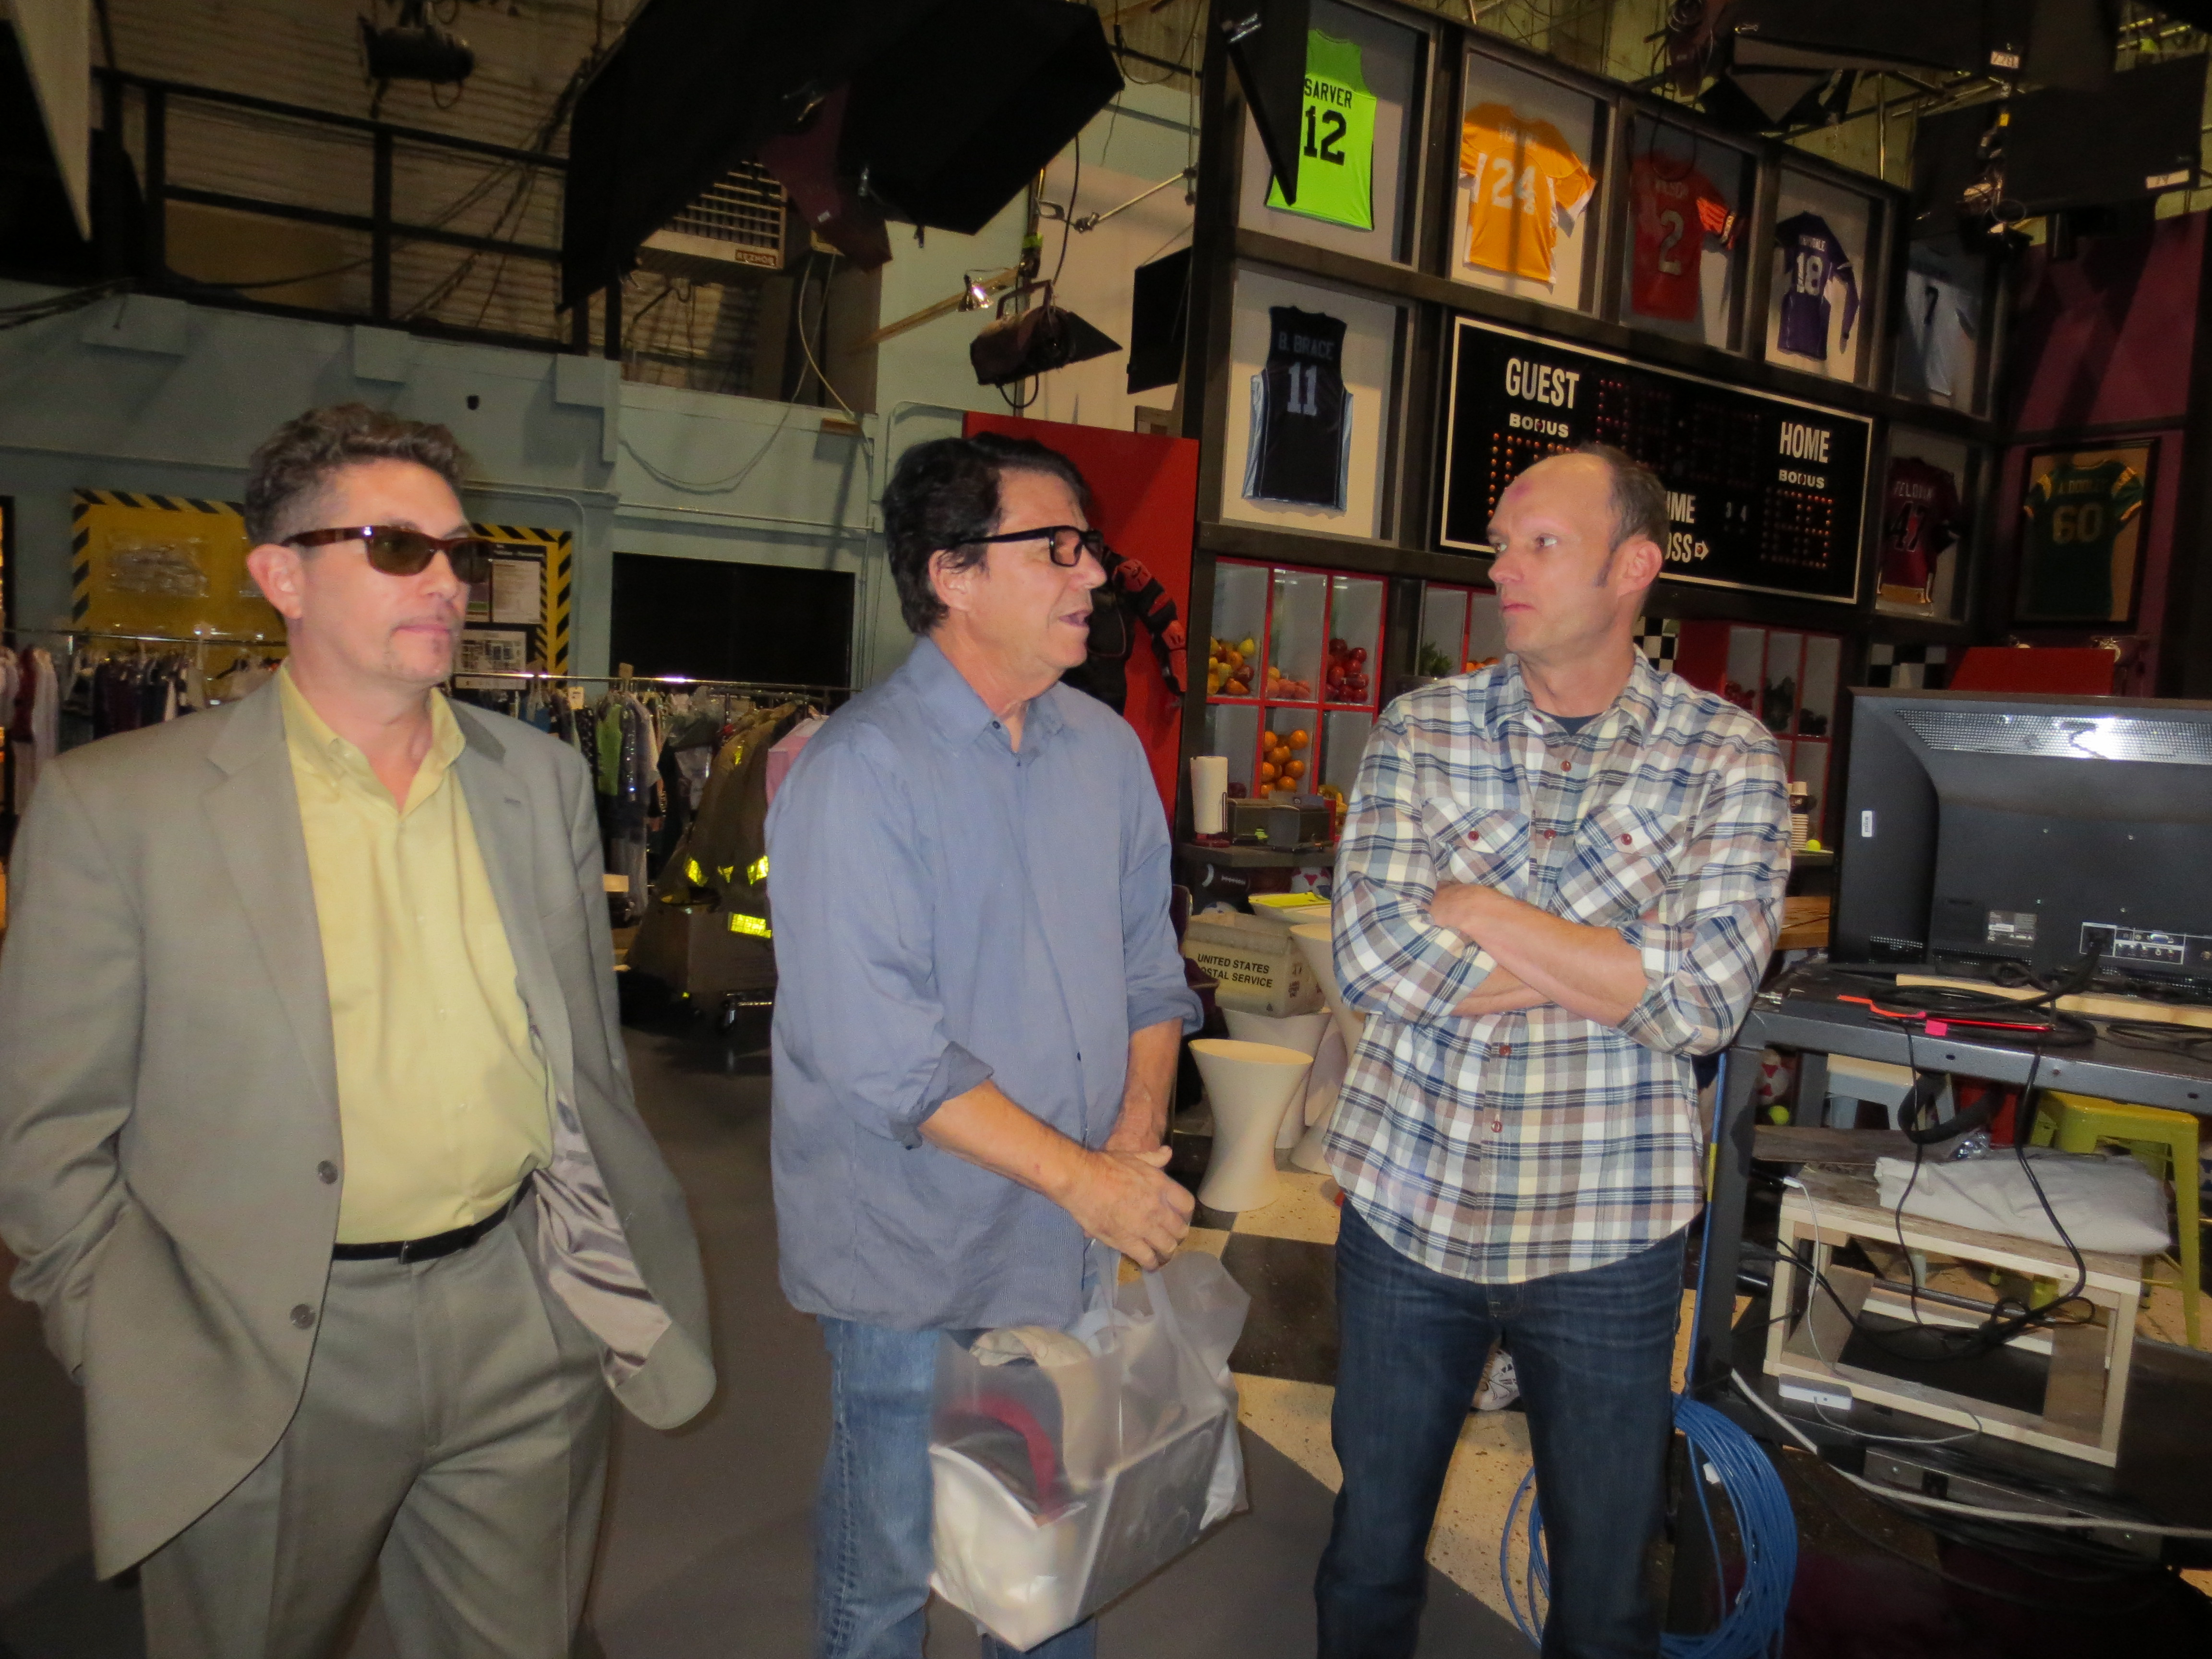 Michael Christaldi, Anson Williams and Brian Stepanek at Stage 19 at Paramount Studios former home of the longtime series Happy Days. The Nickelodeon show Nicky,Ricky,Dicky & Dawn currently films there.